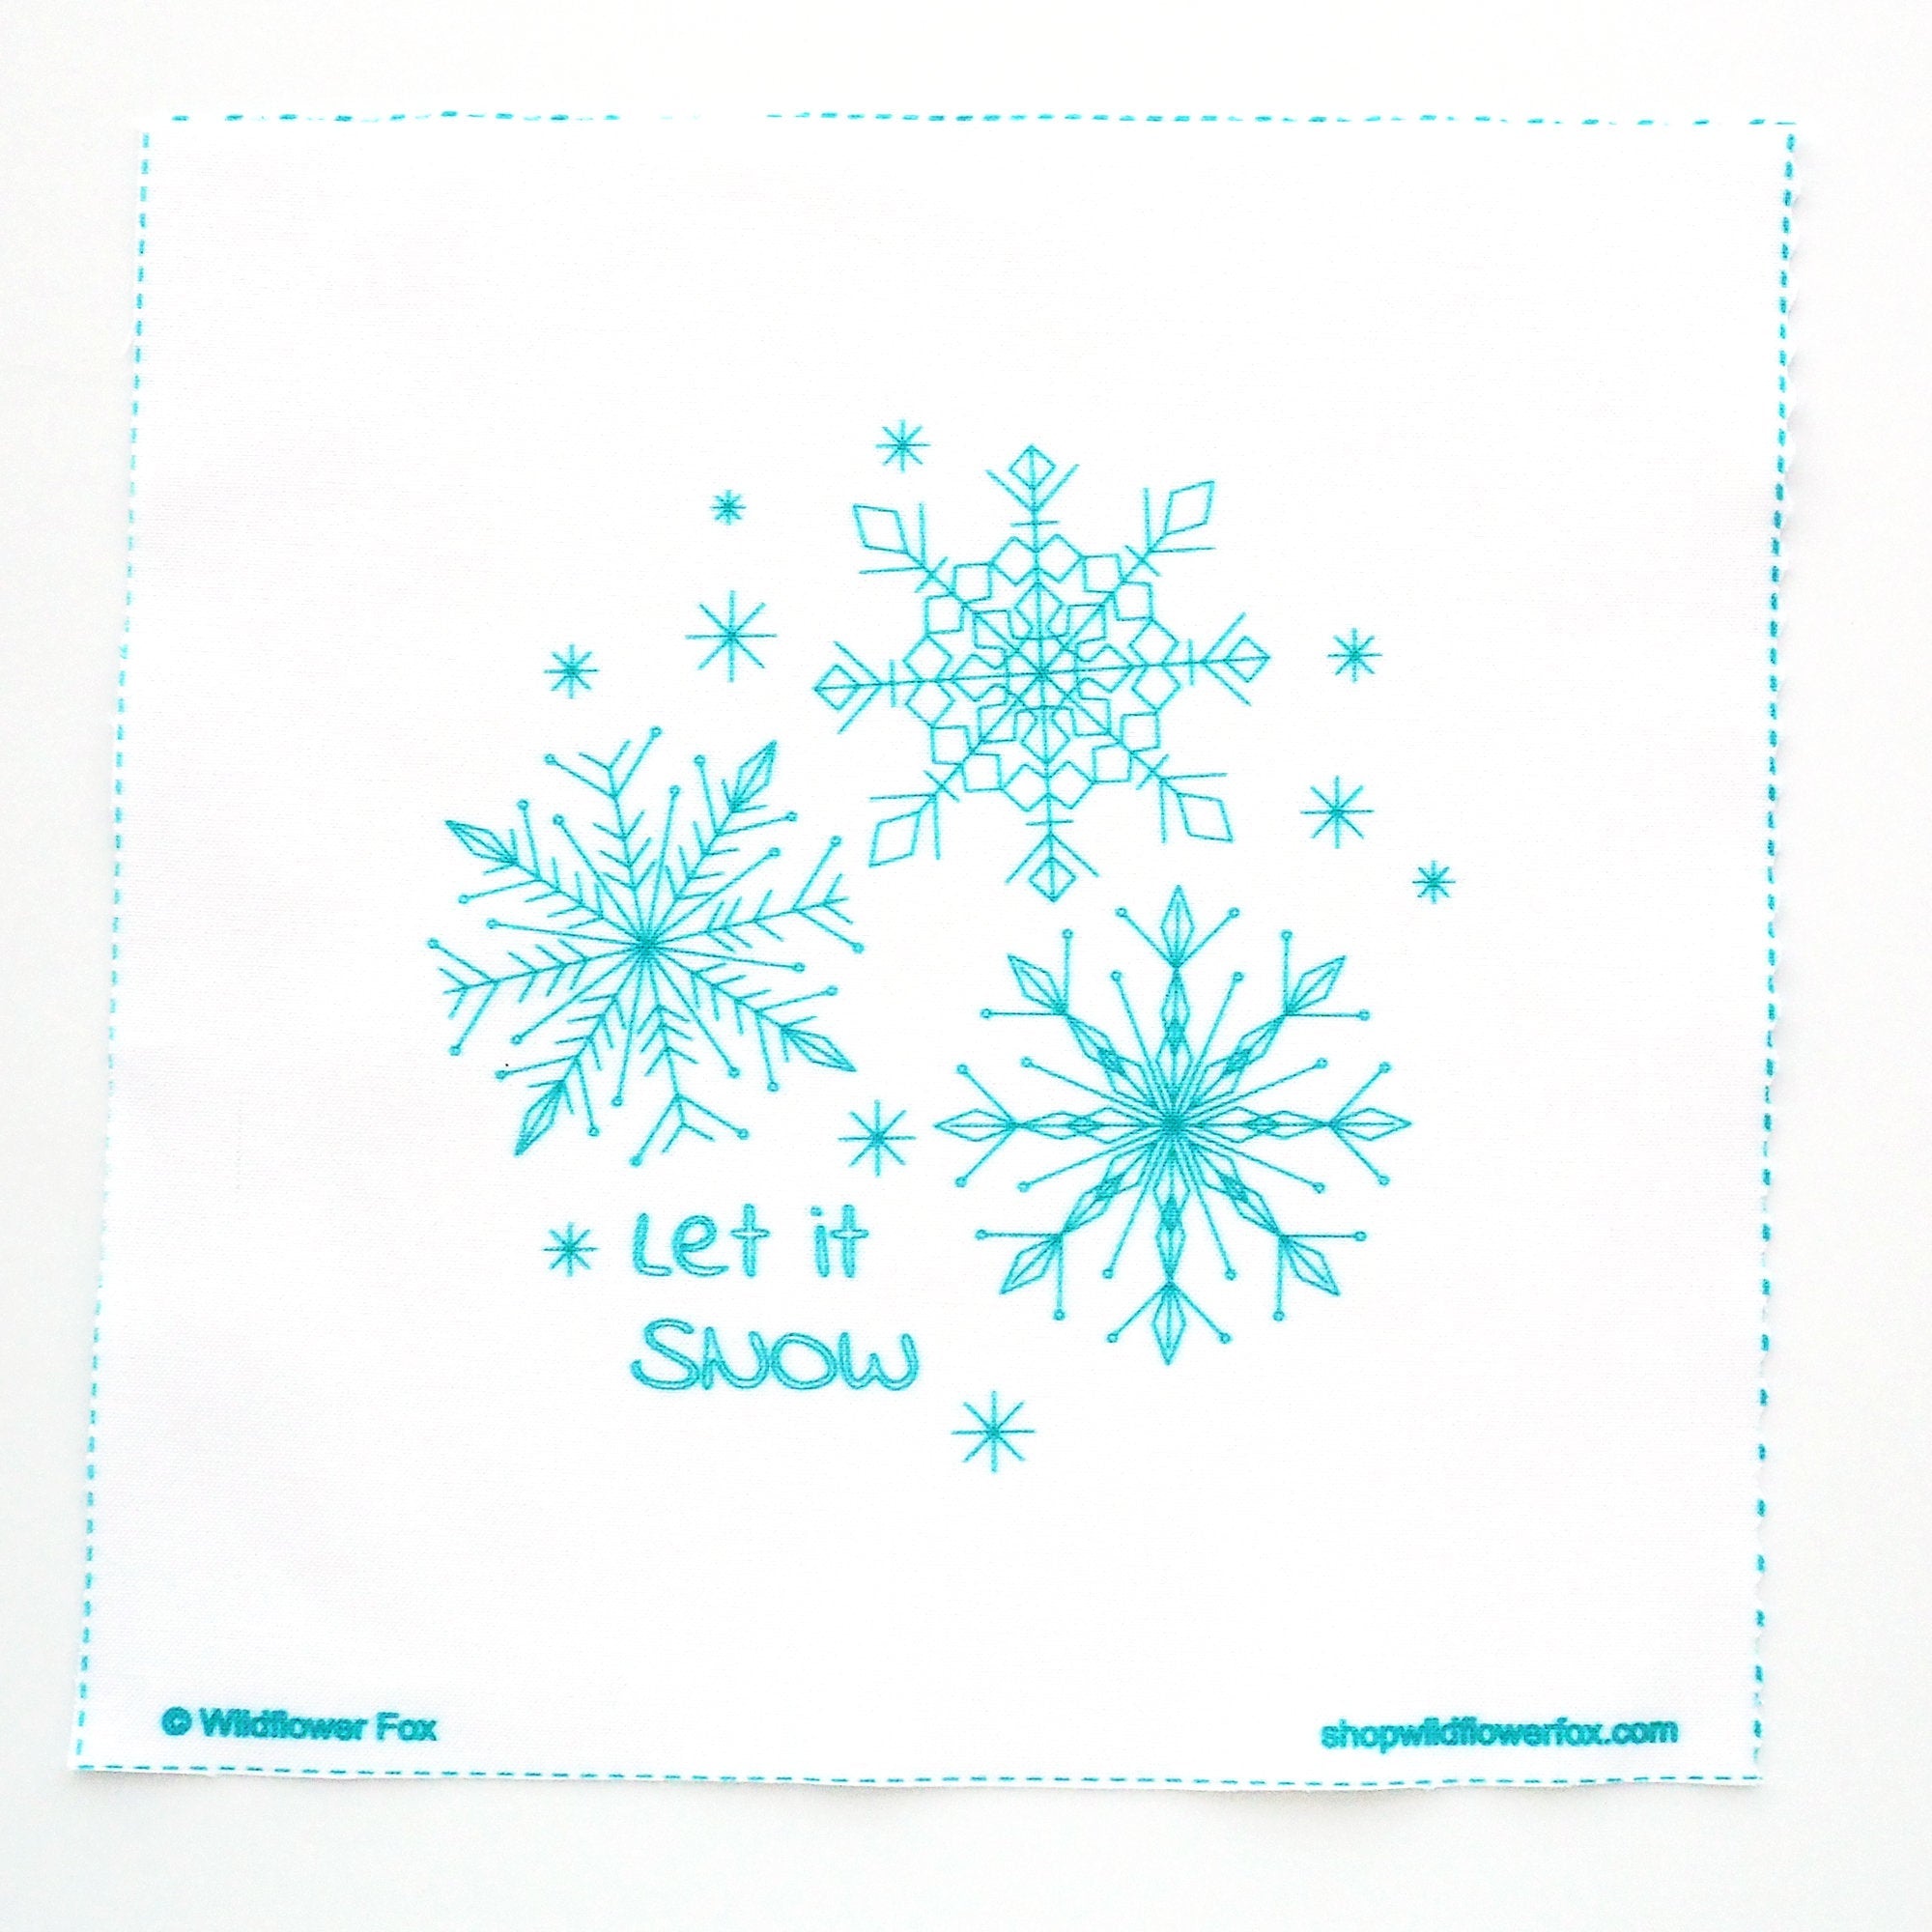 Let it Snow Printed Fabric Hand Embroidery Pattern